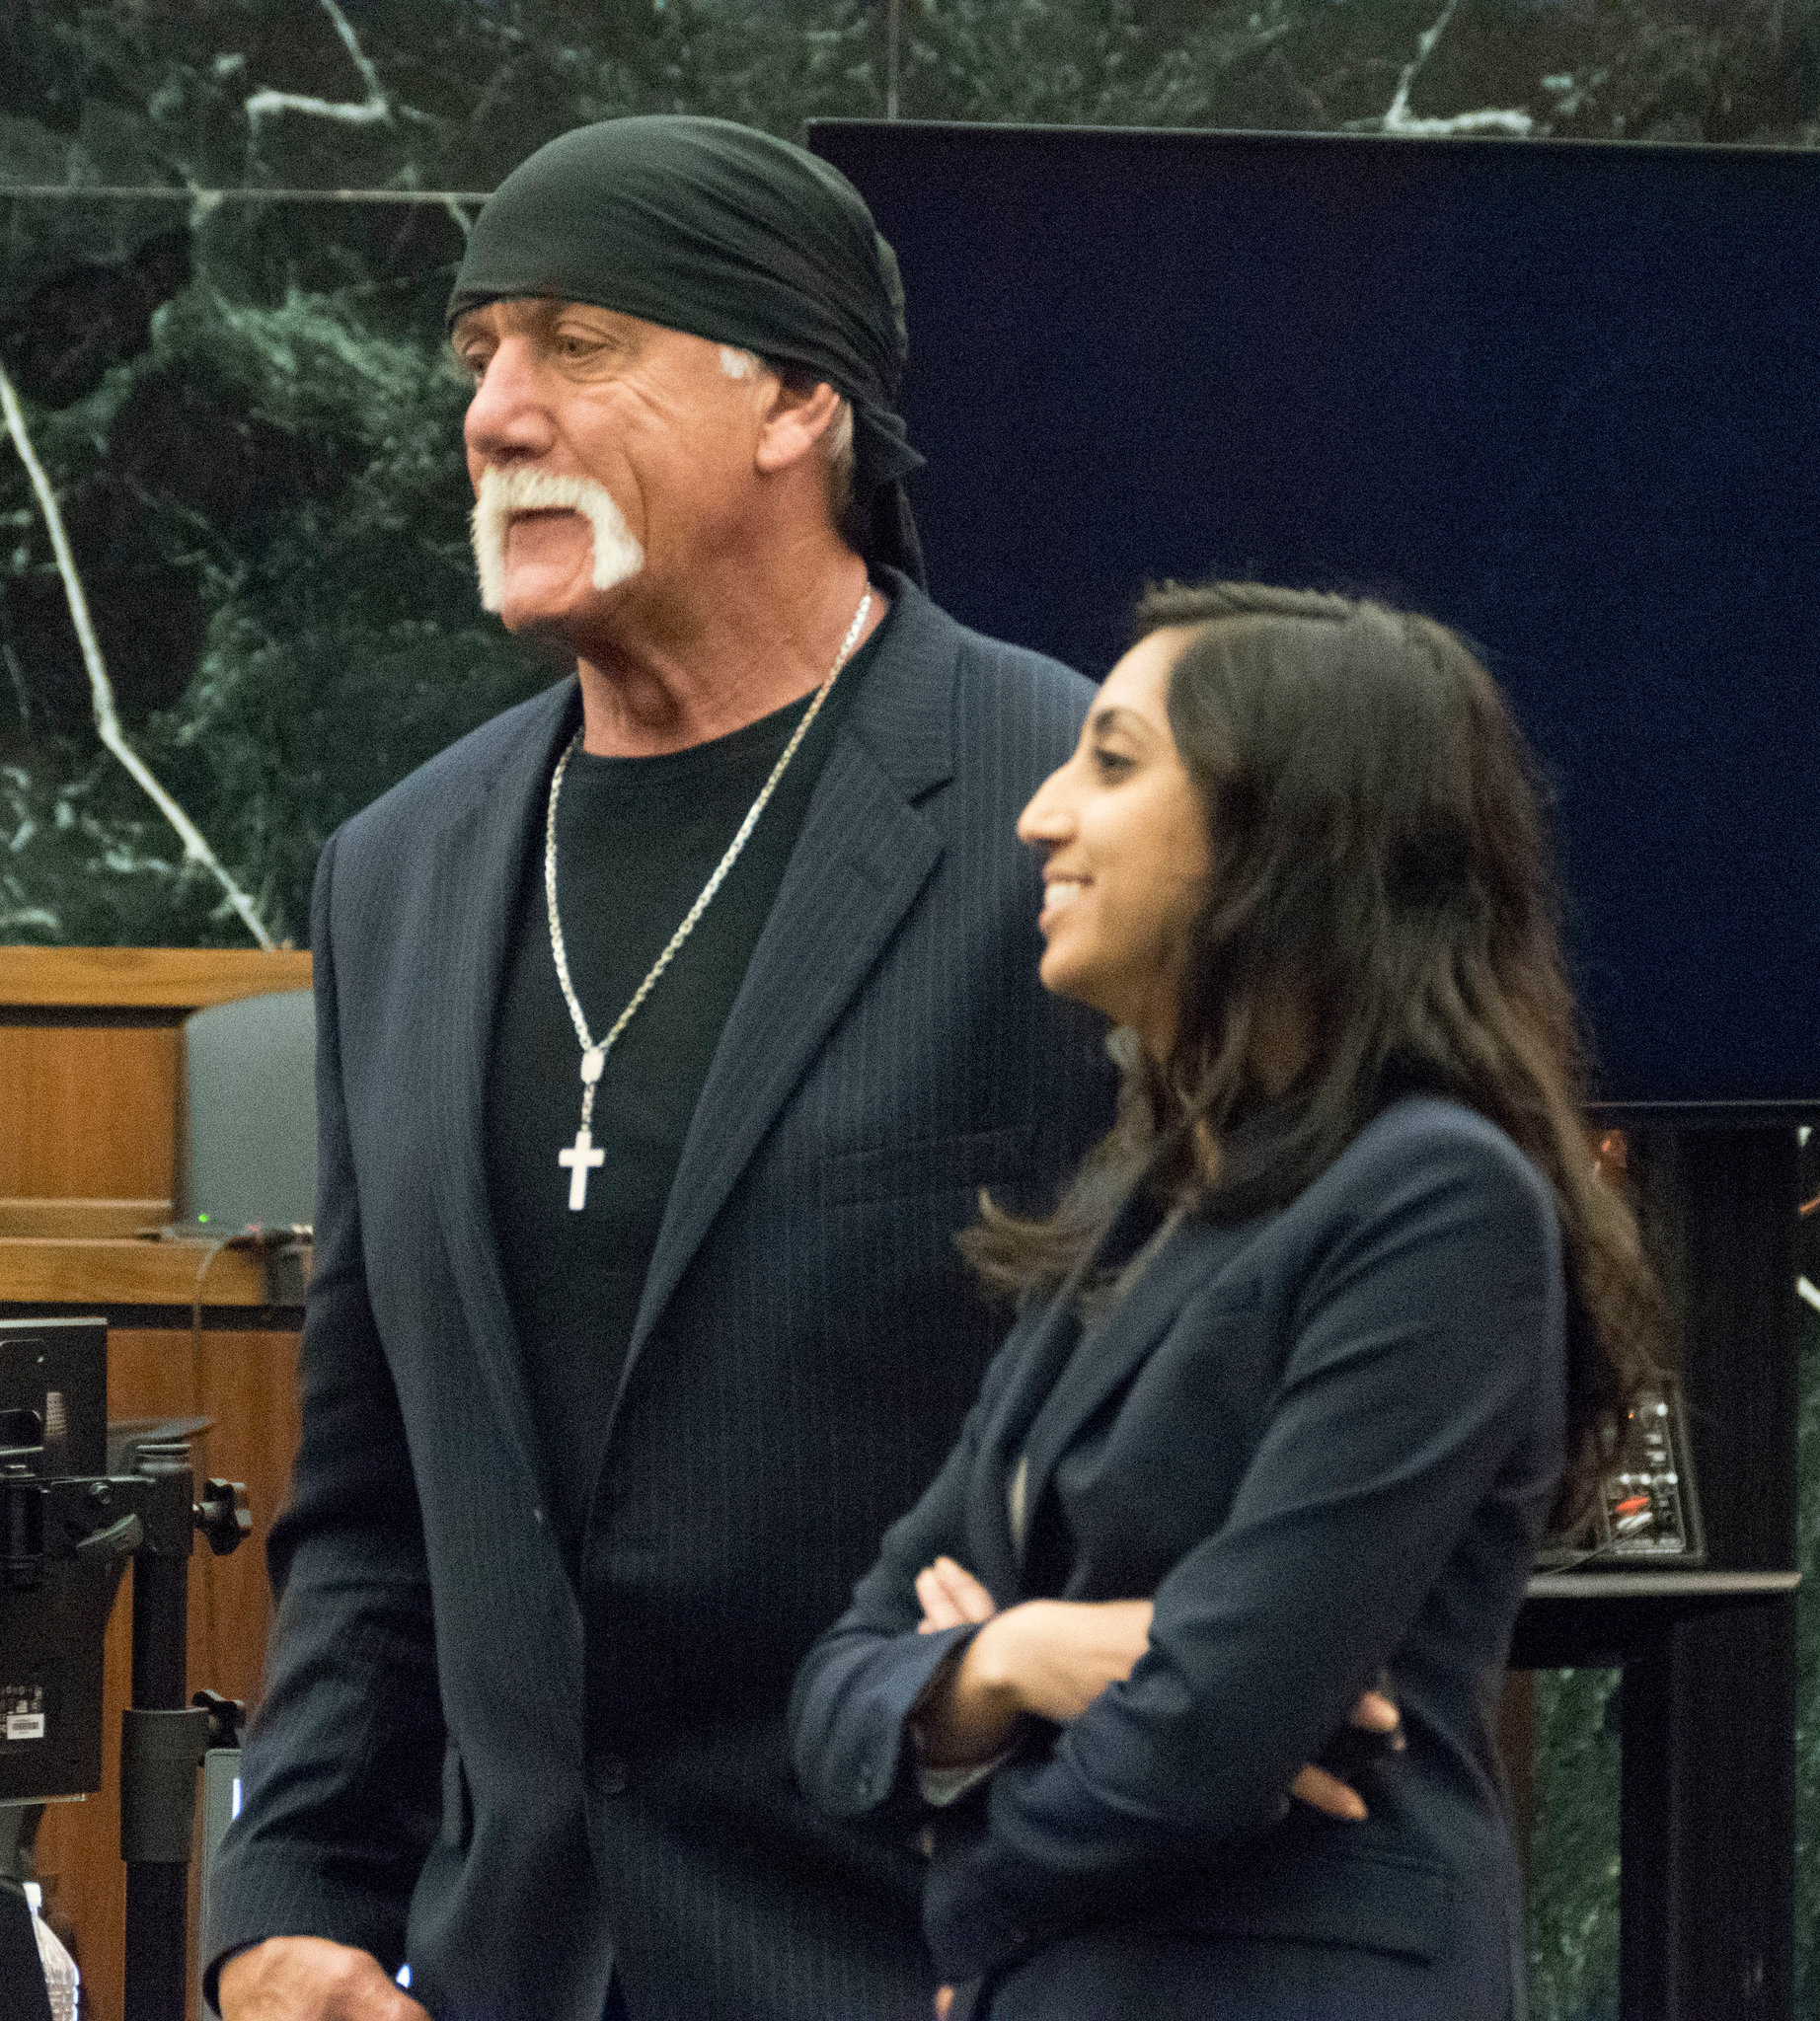 Hulk Hogan Awarded $115 Million in Privacy Suit Against Gawker ...